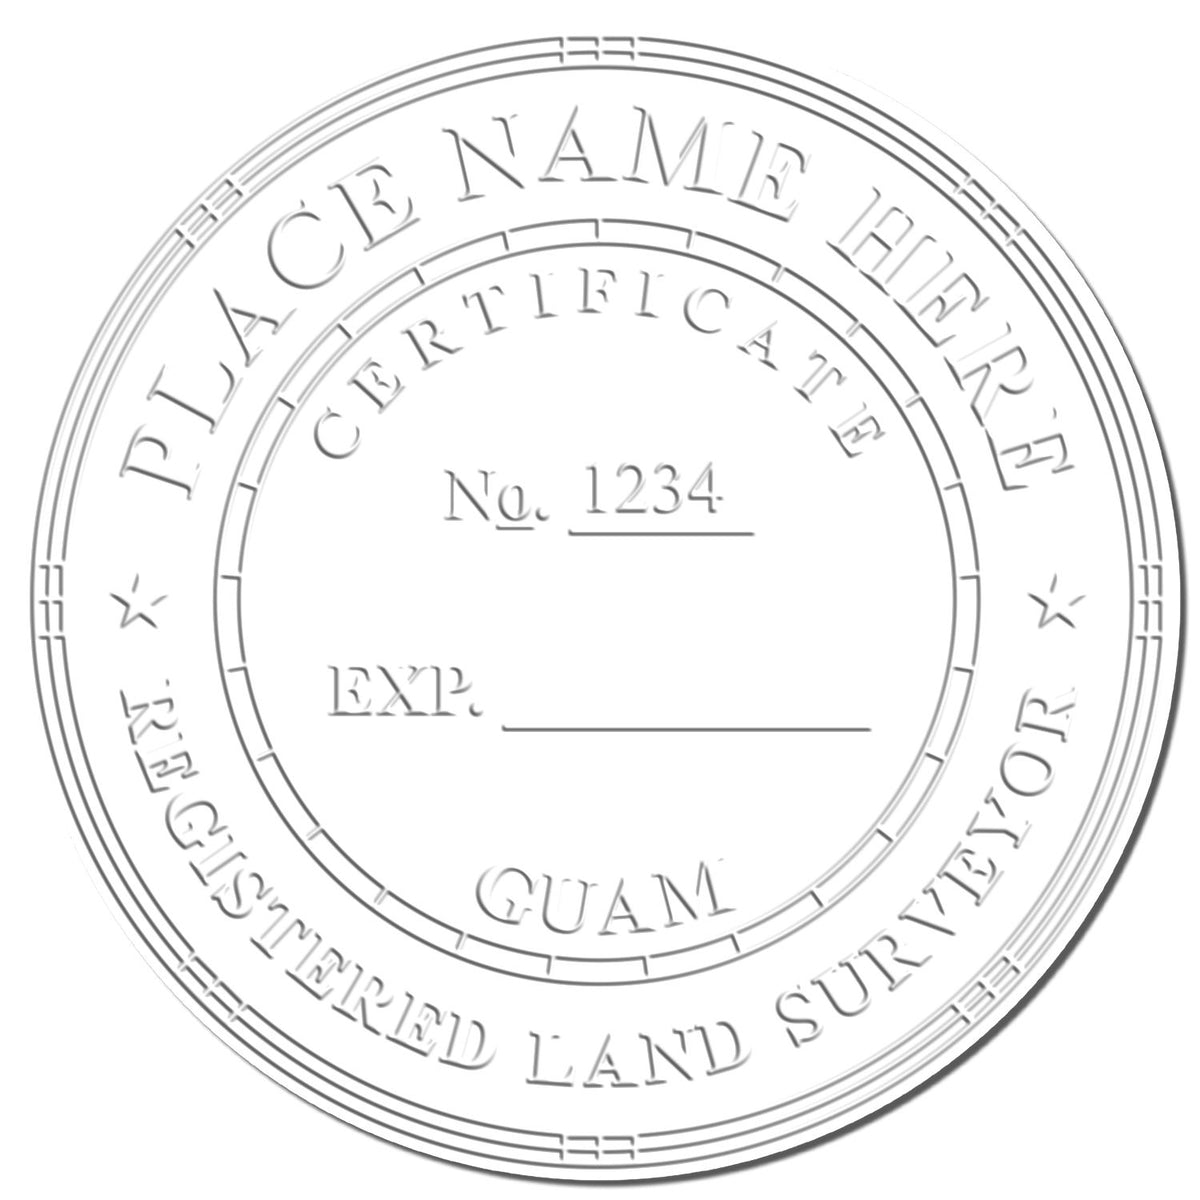 This paper is stamped with a sample imprint of the Hybrid Guam Land Surveyor Seal, signifying its quality and reliability.